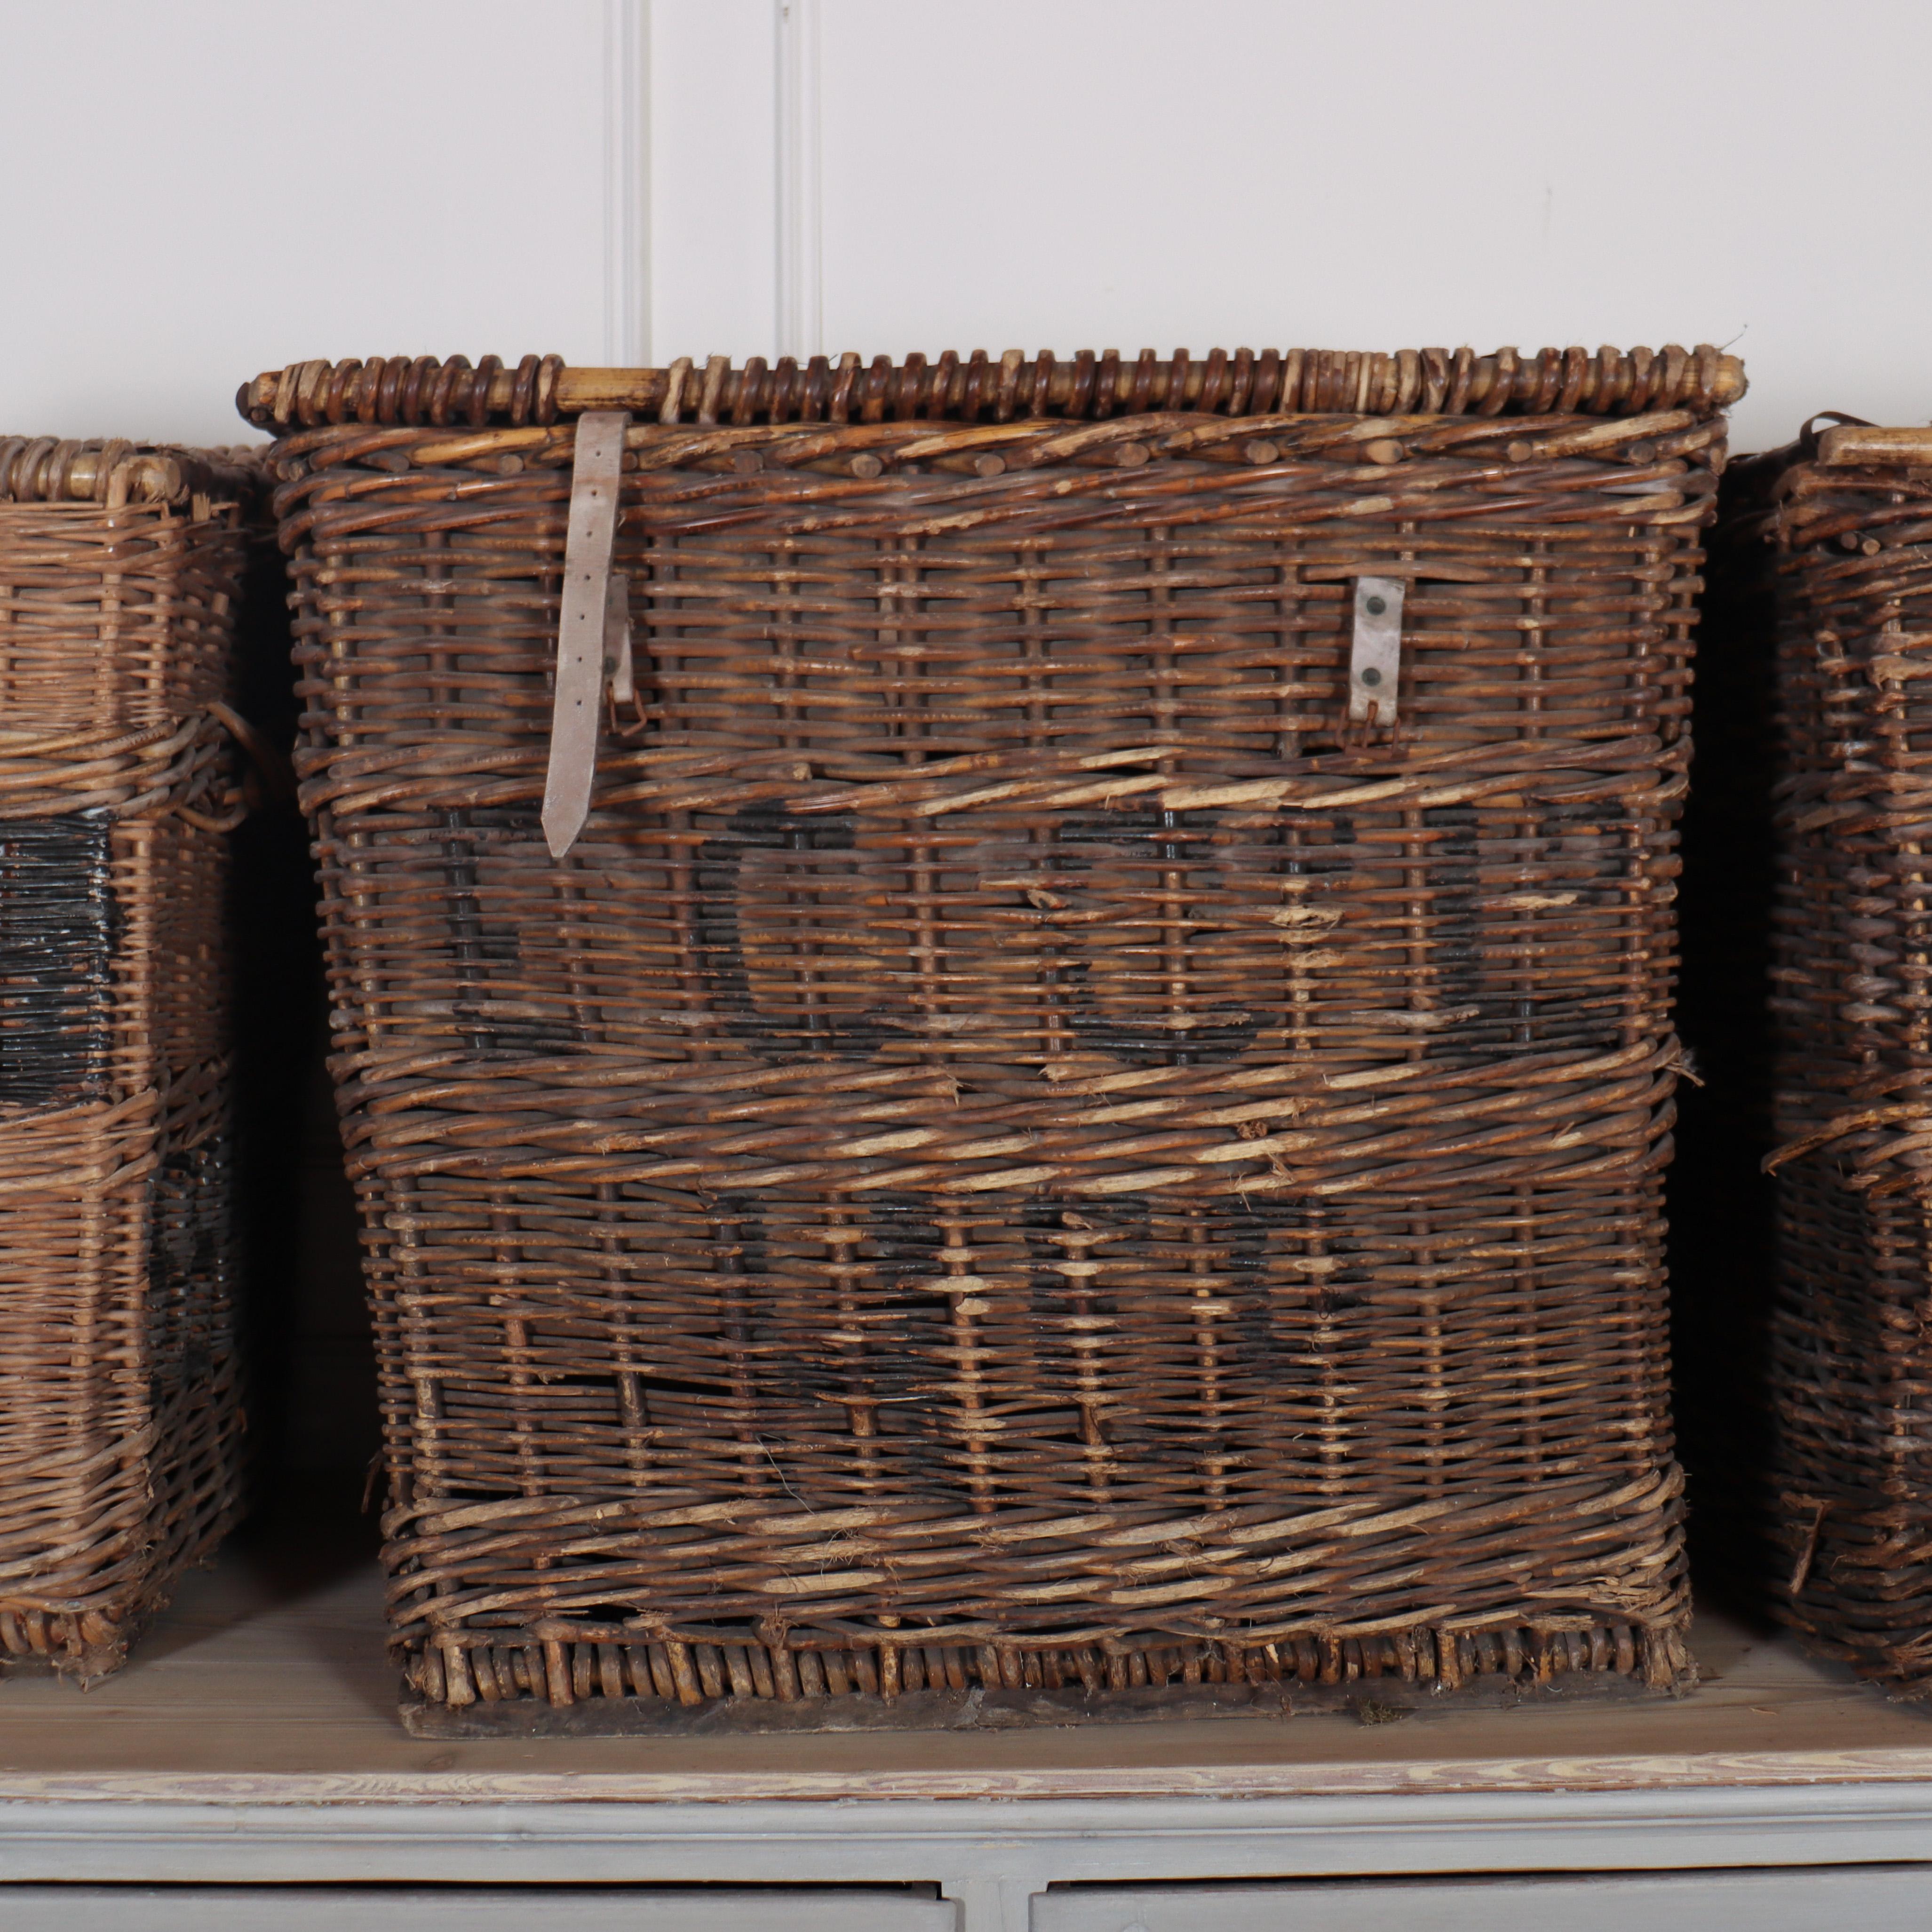 Victorian Collection of Wicker Log Baskets